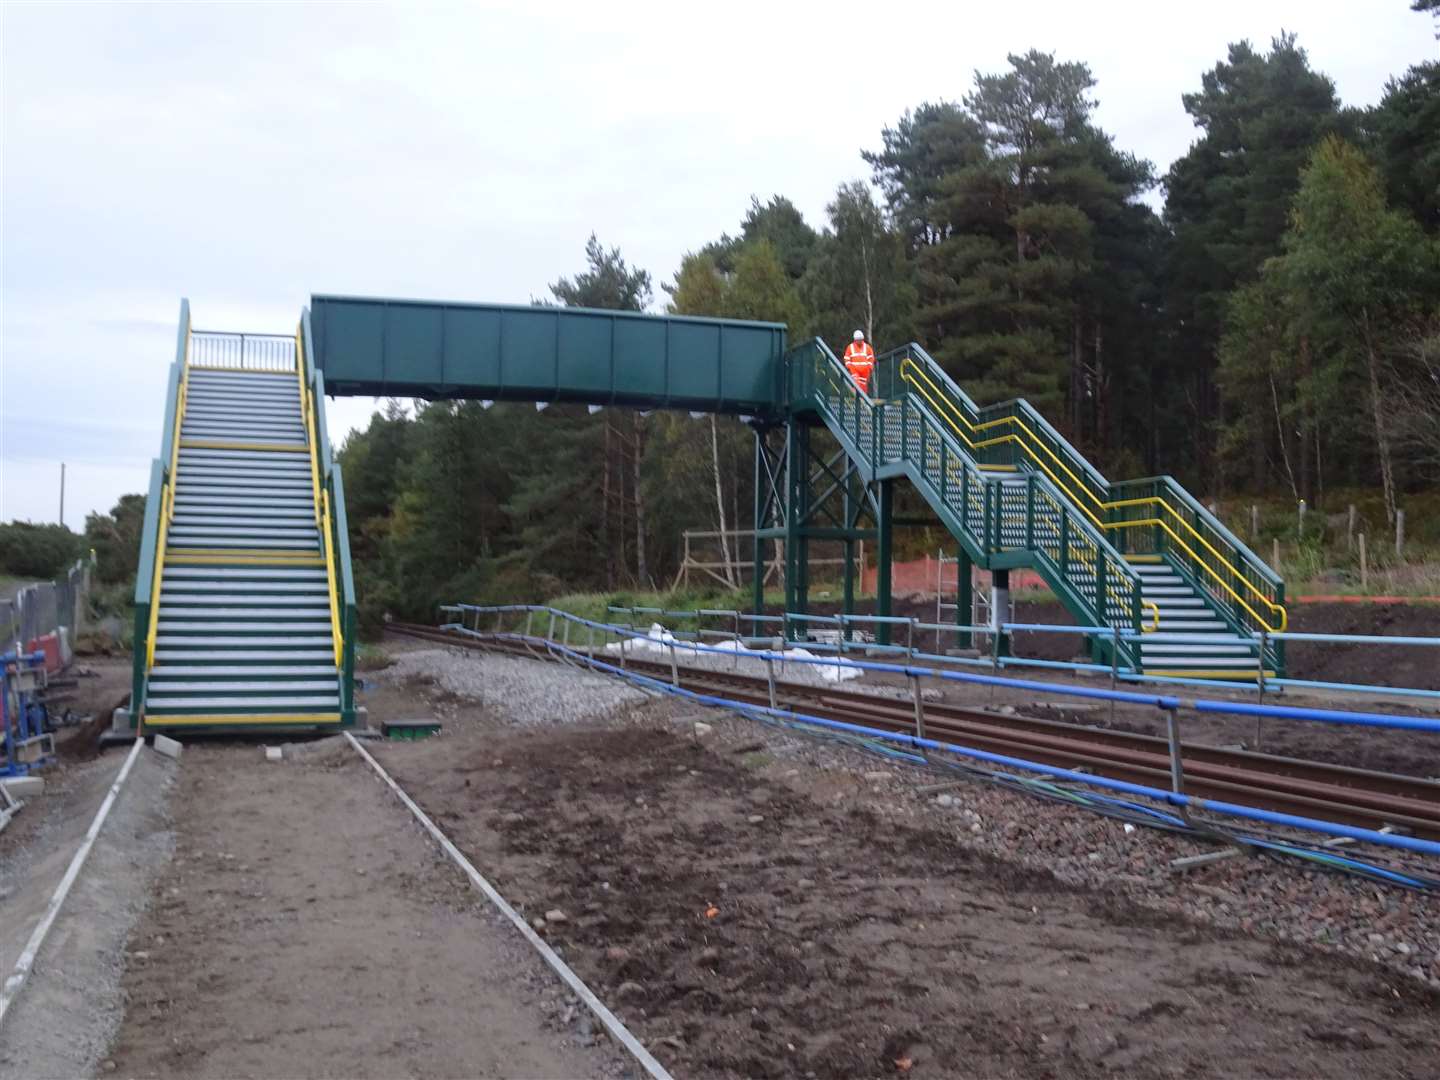 A new footbridge and path has replaced the level crossing at Petty.